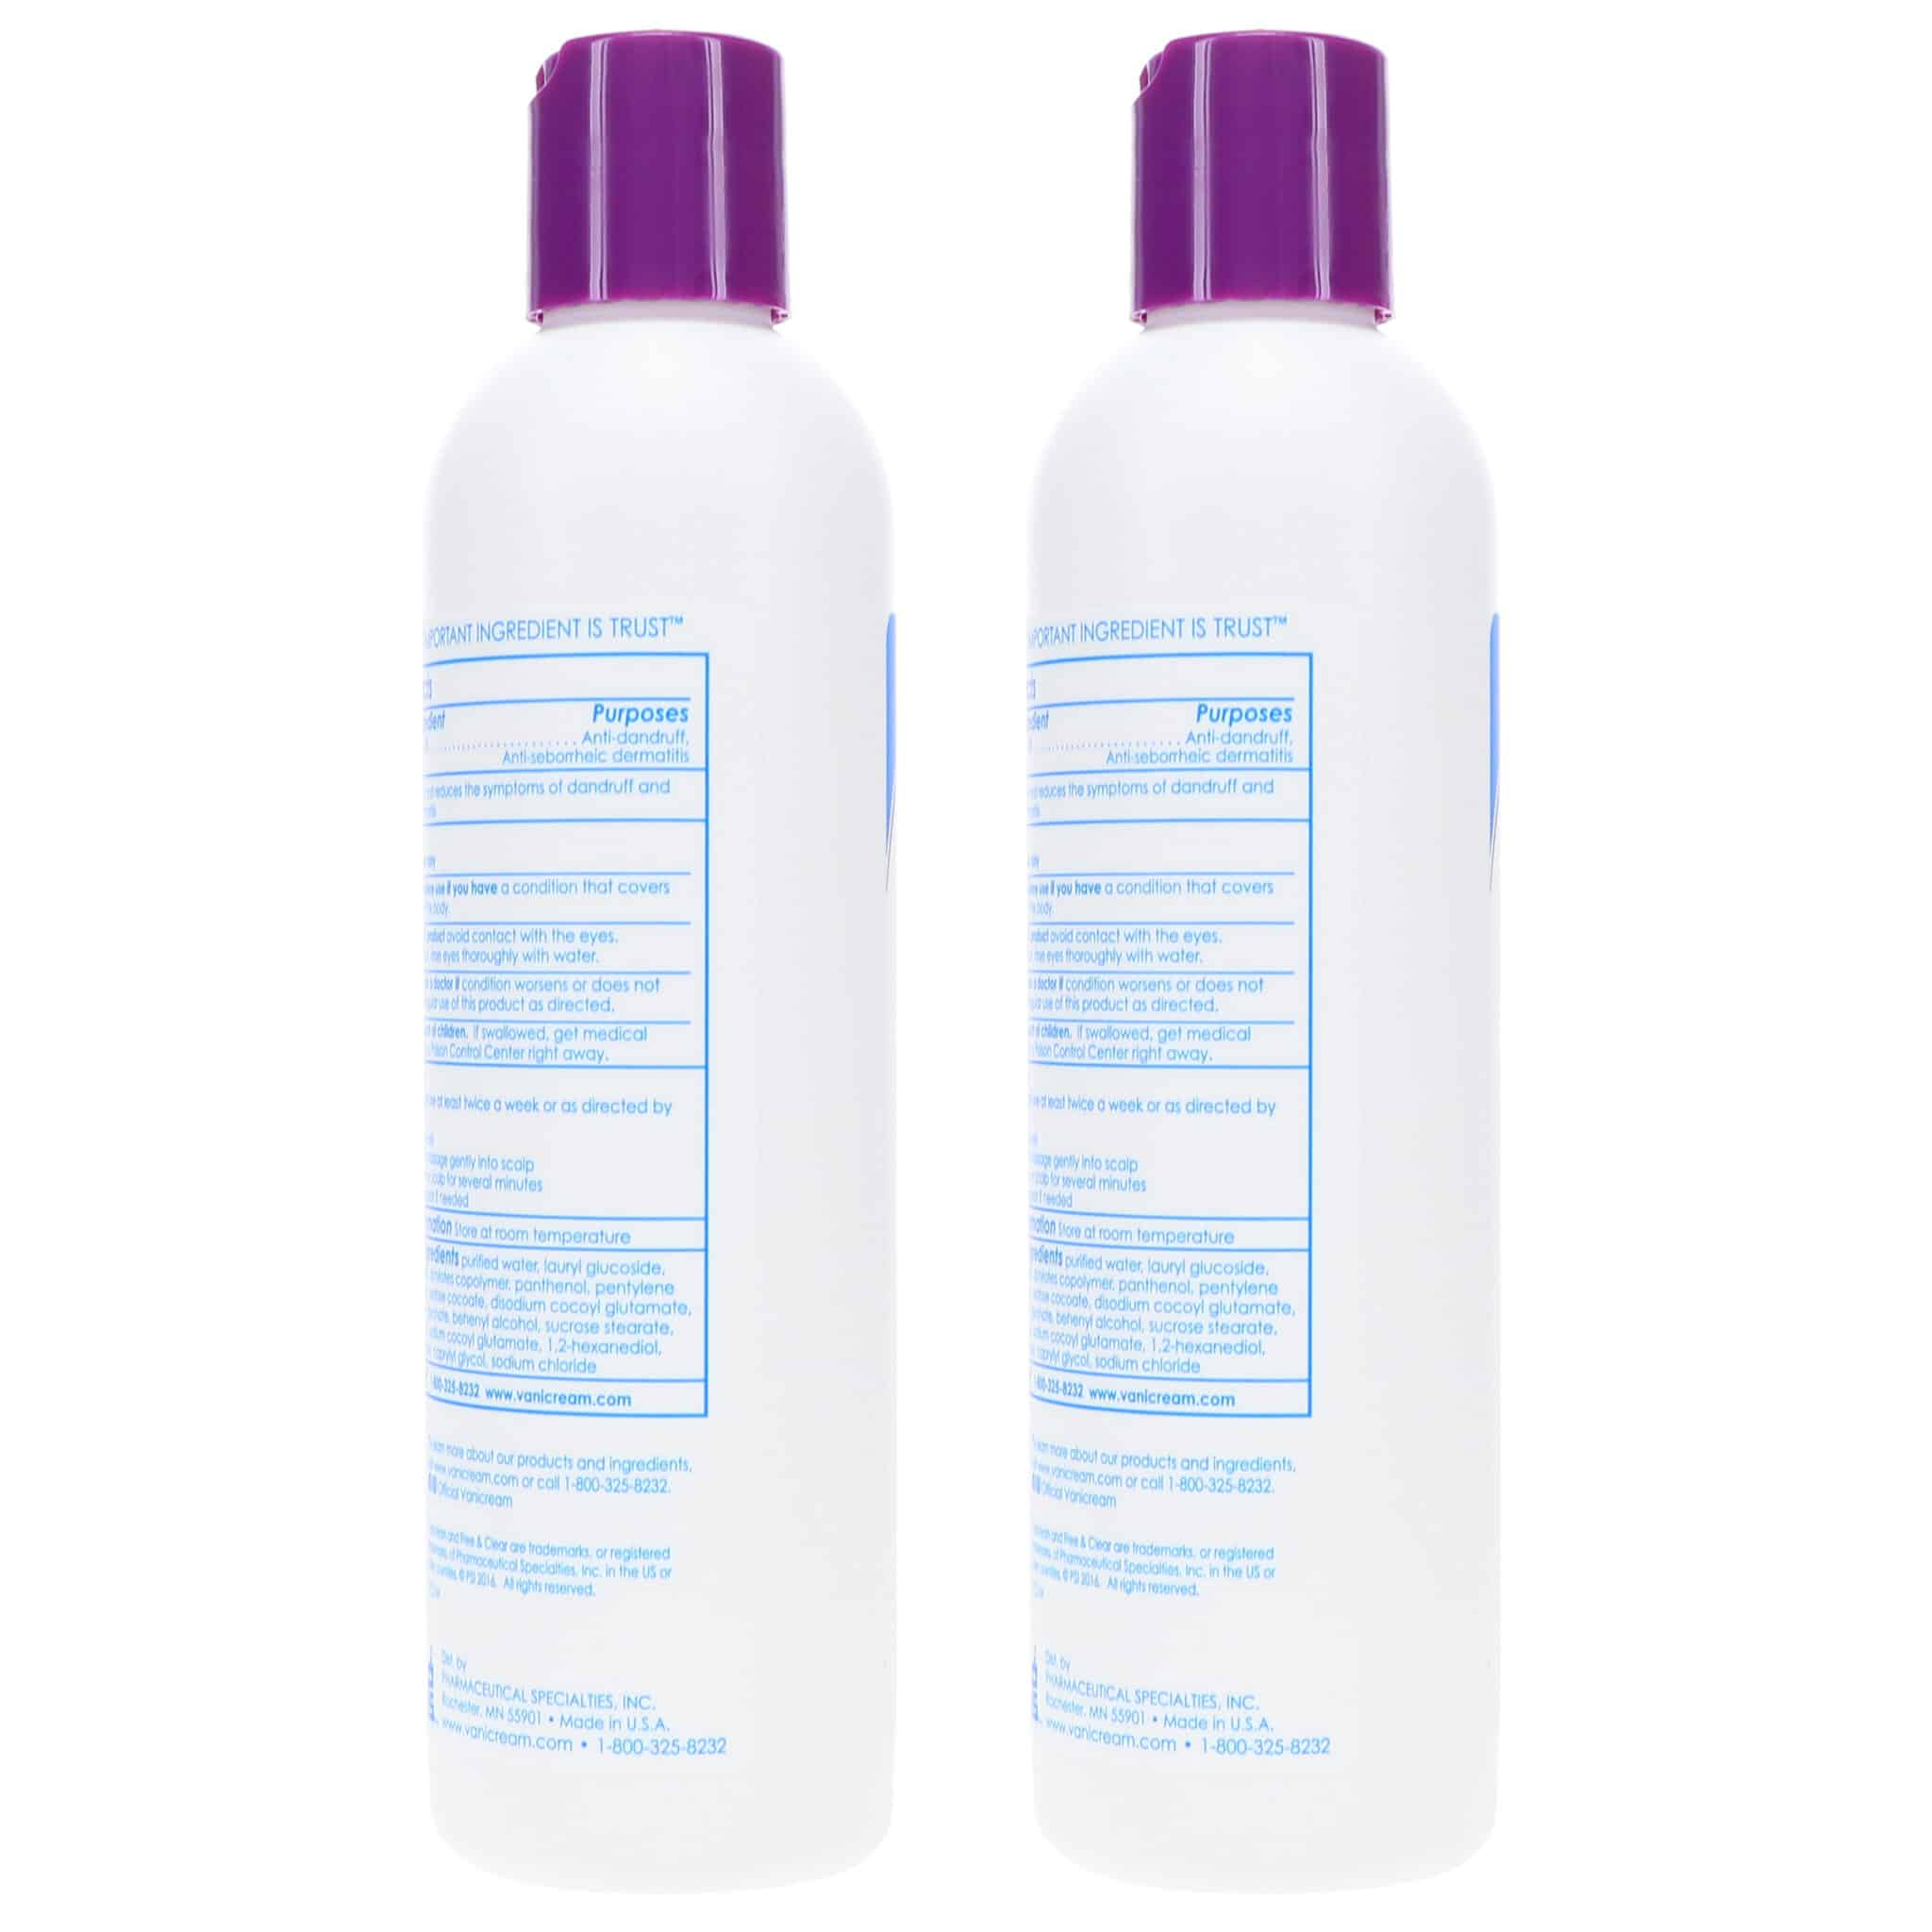 renere Kloster At Free & Clear Medicated Anti-Dandruff Shampoo, 8 oz. 2 Pack